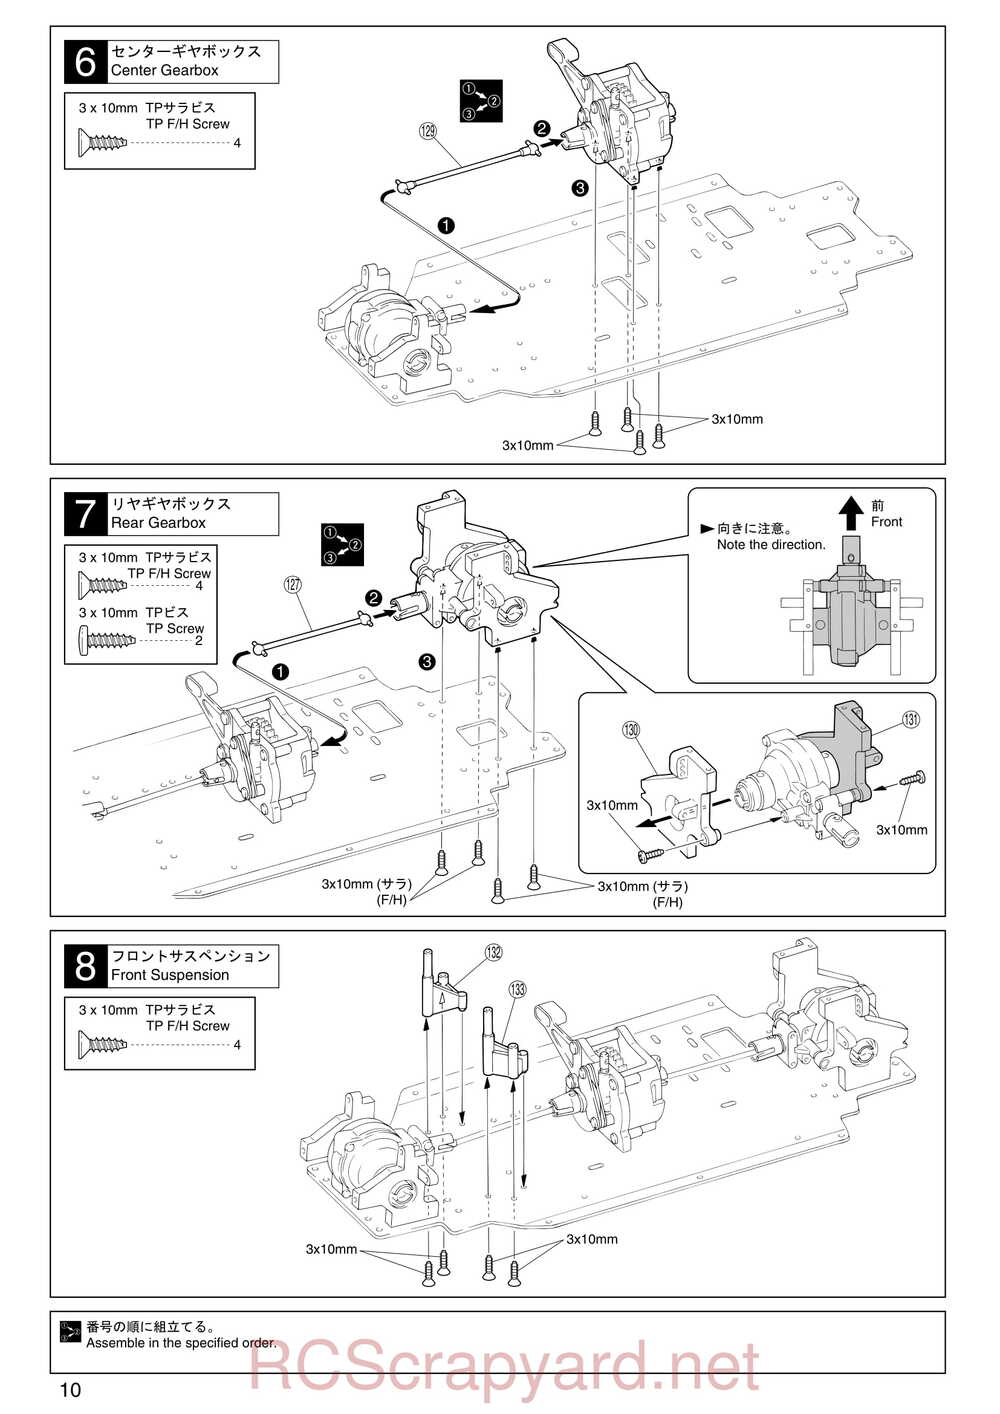 Kyosho - 31213 - TR-15 Monster-Touring - Manual - Page 10